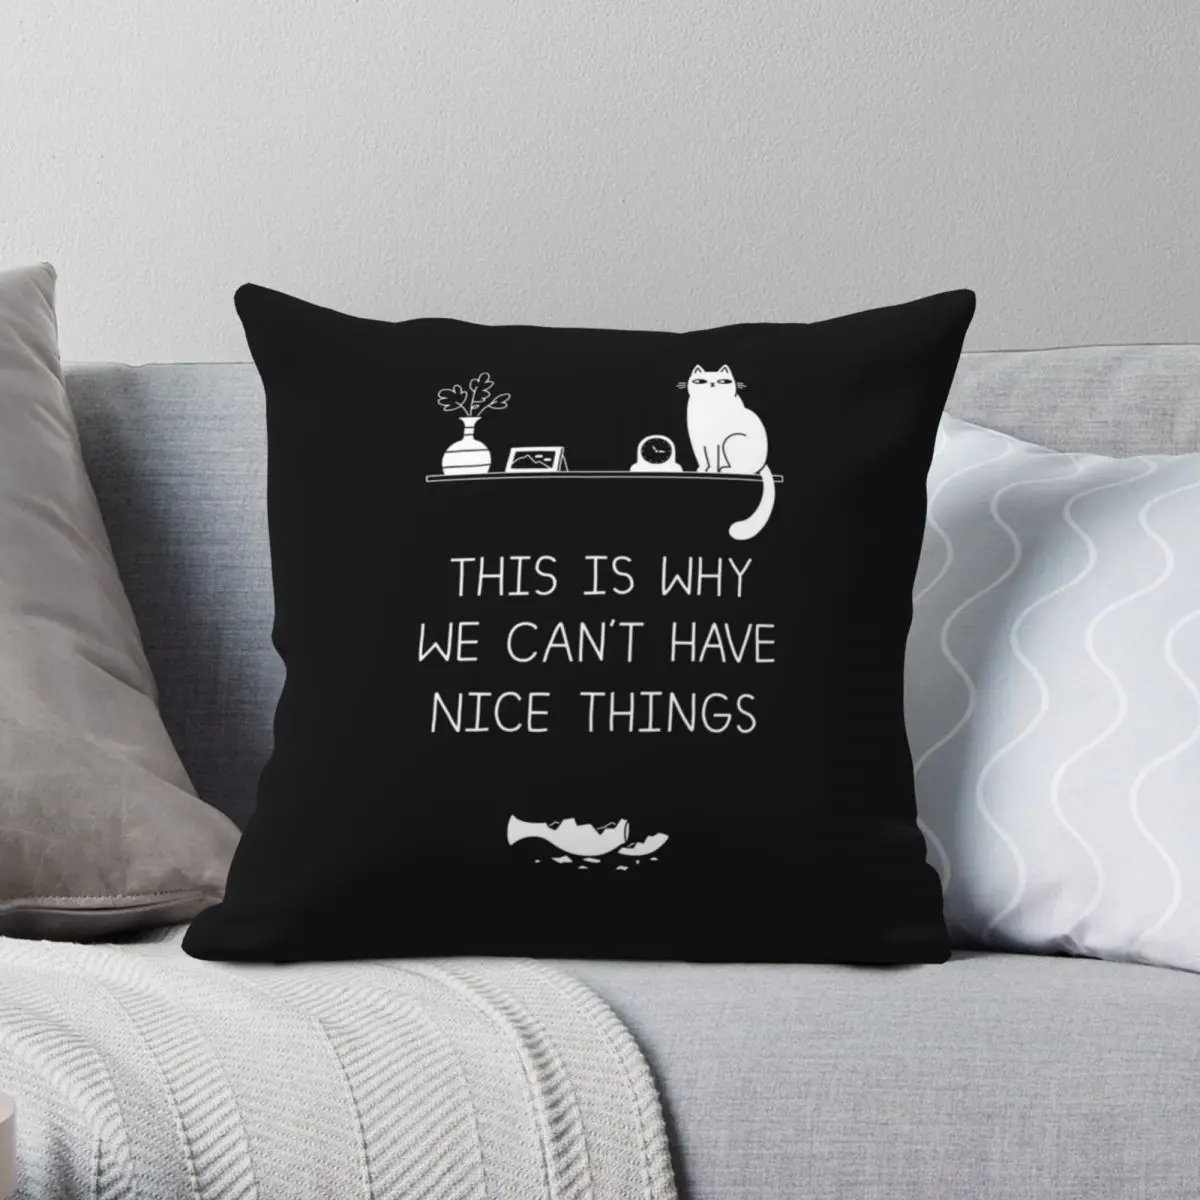 

This Is Why We Can't Have Nice Things Square Pillowcase Polyester Linen Velvet Zip Throw Pillow Case Sofa Cushion Cover